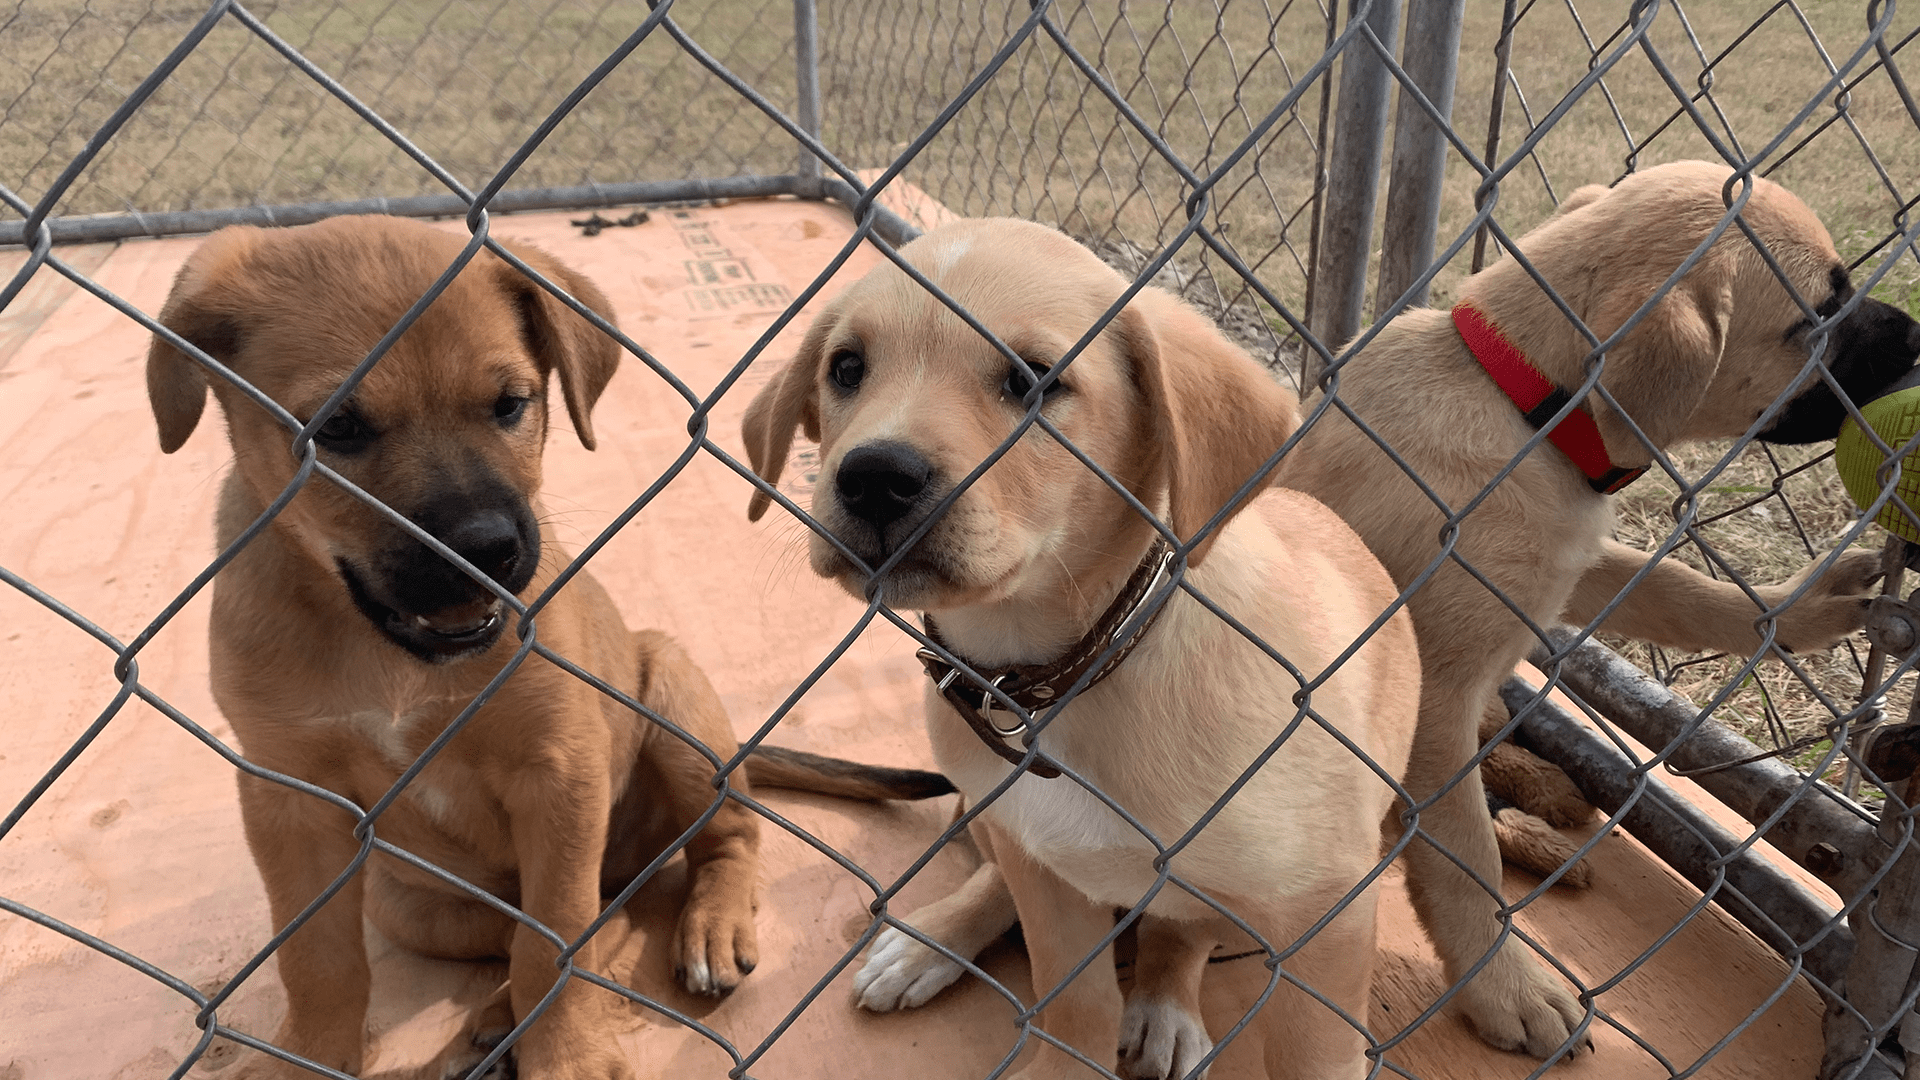 The rescue of Rez dogs: The good, the bad, and the ugly - APTN News